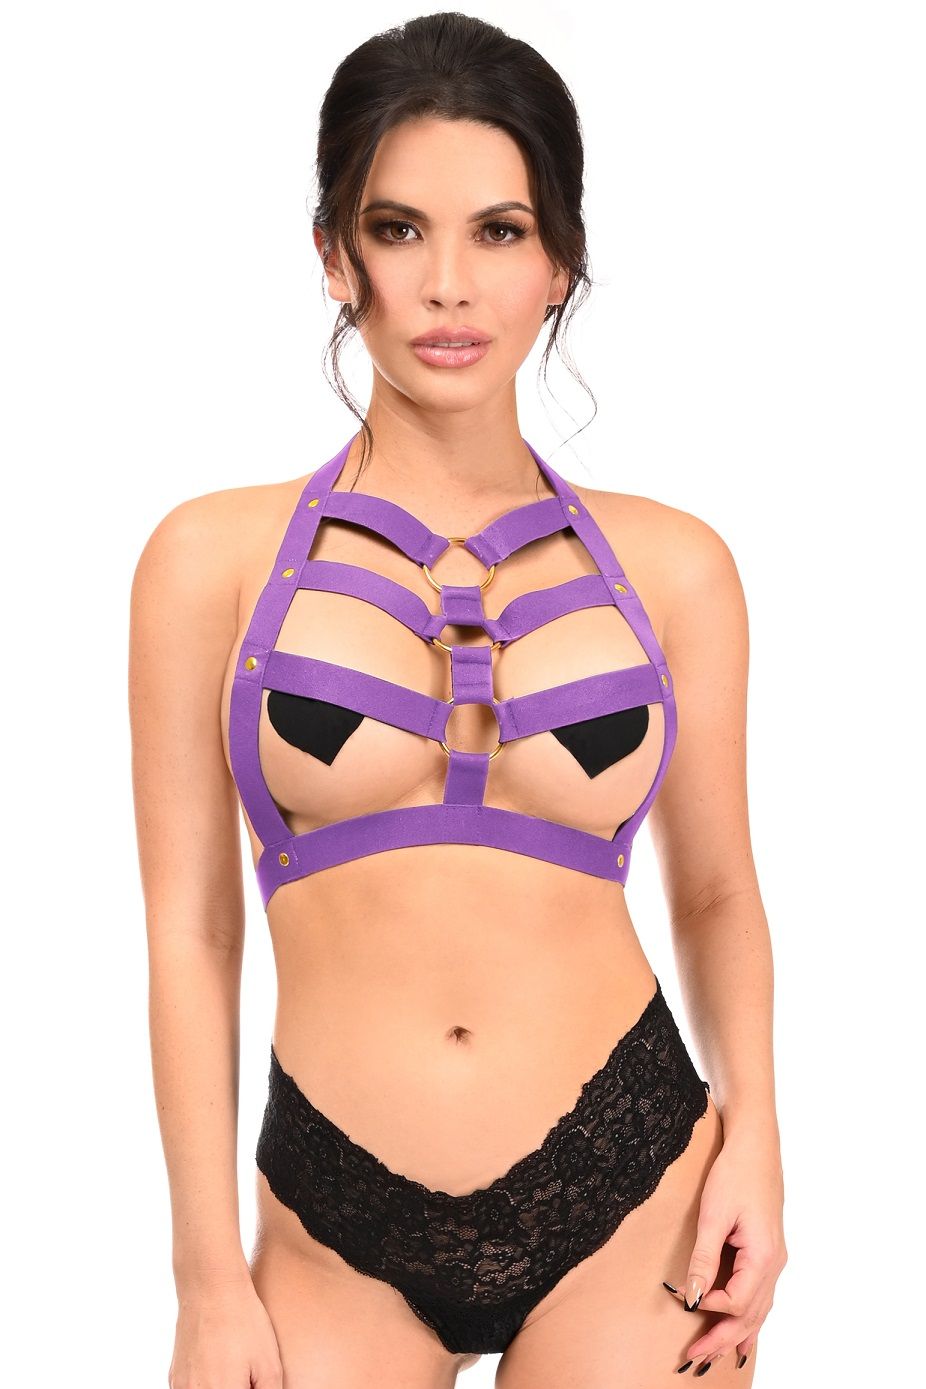 Stretchy Body Harness w Metal Ring Detail